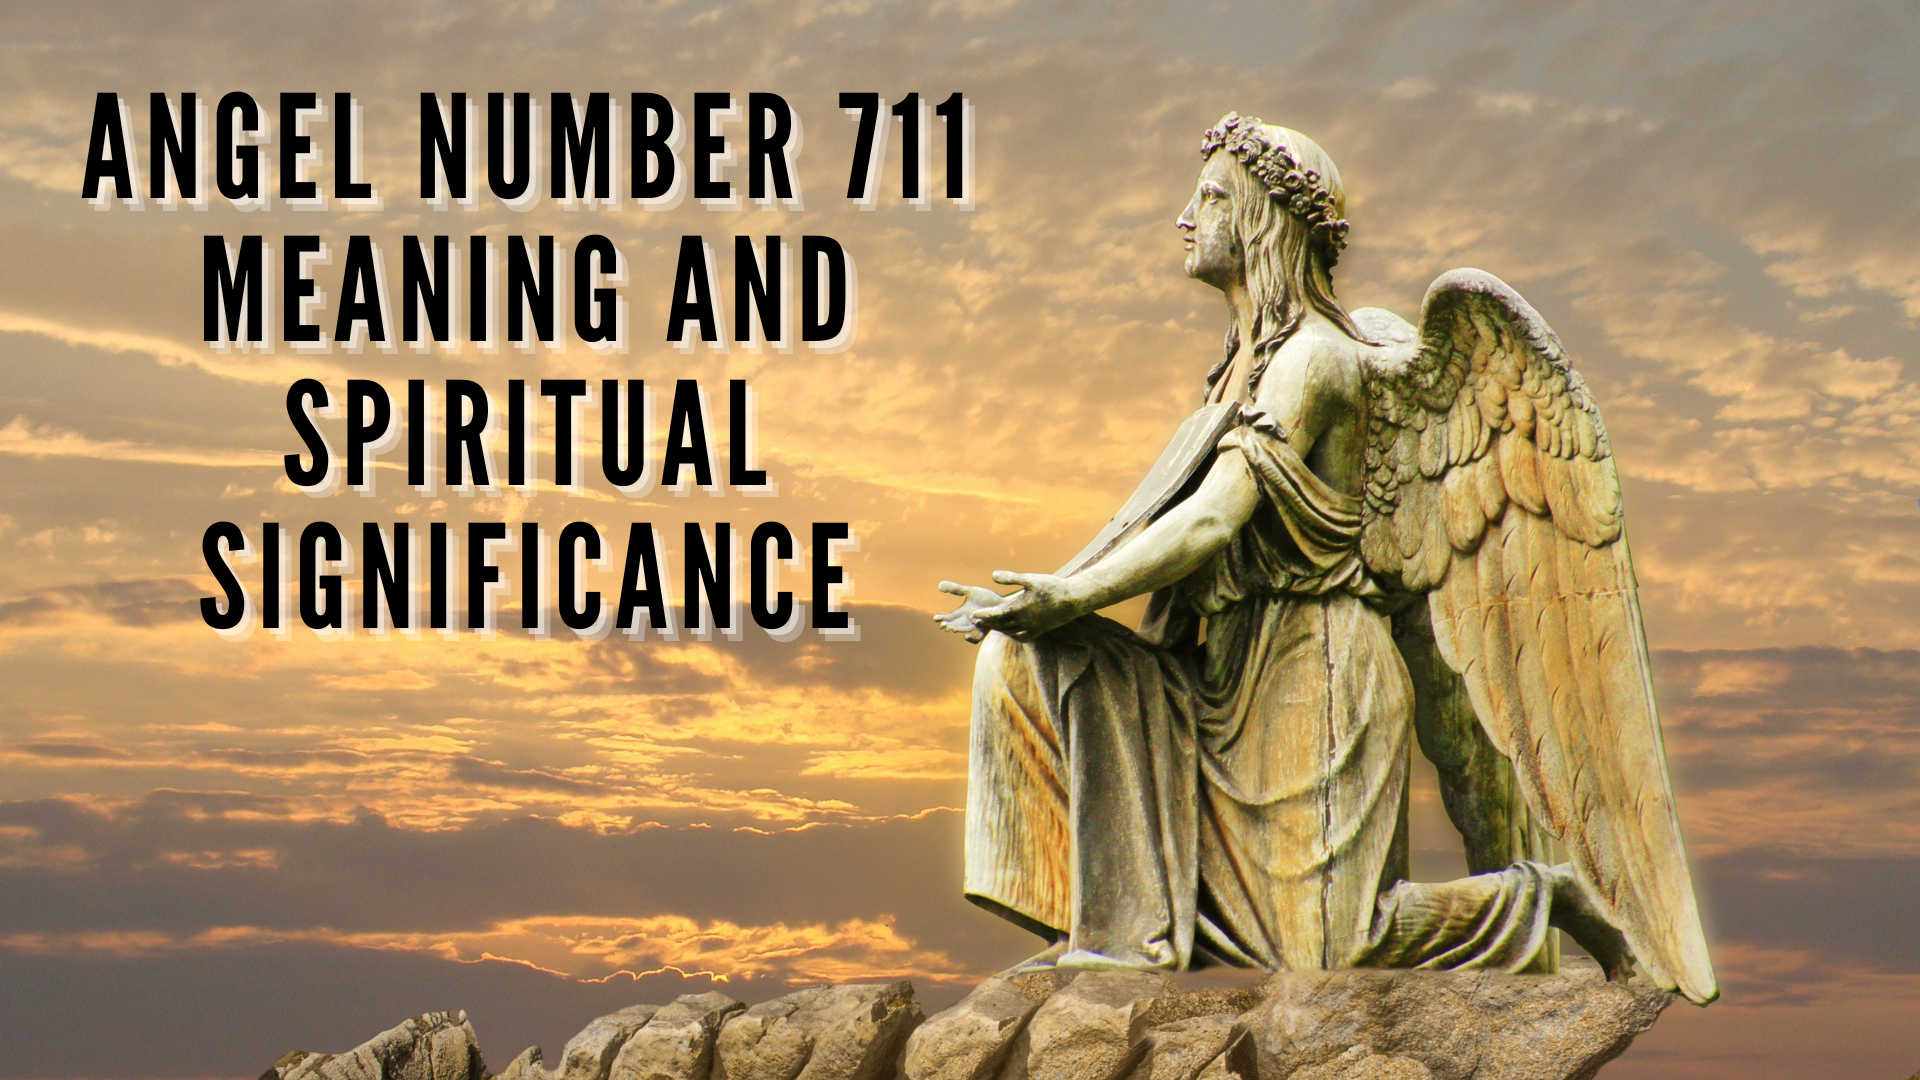 A kneeling angel statue with words Angel Number 711 Meaning And Spiritual Significance